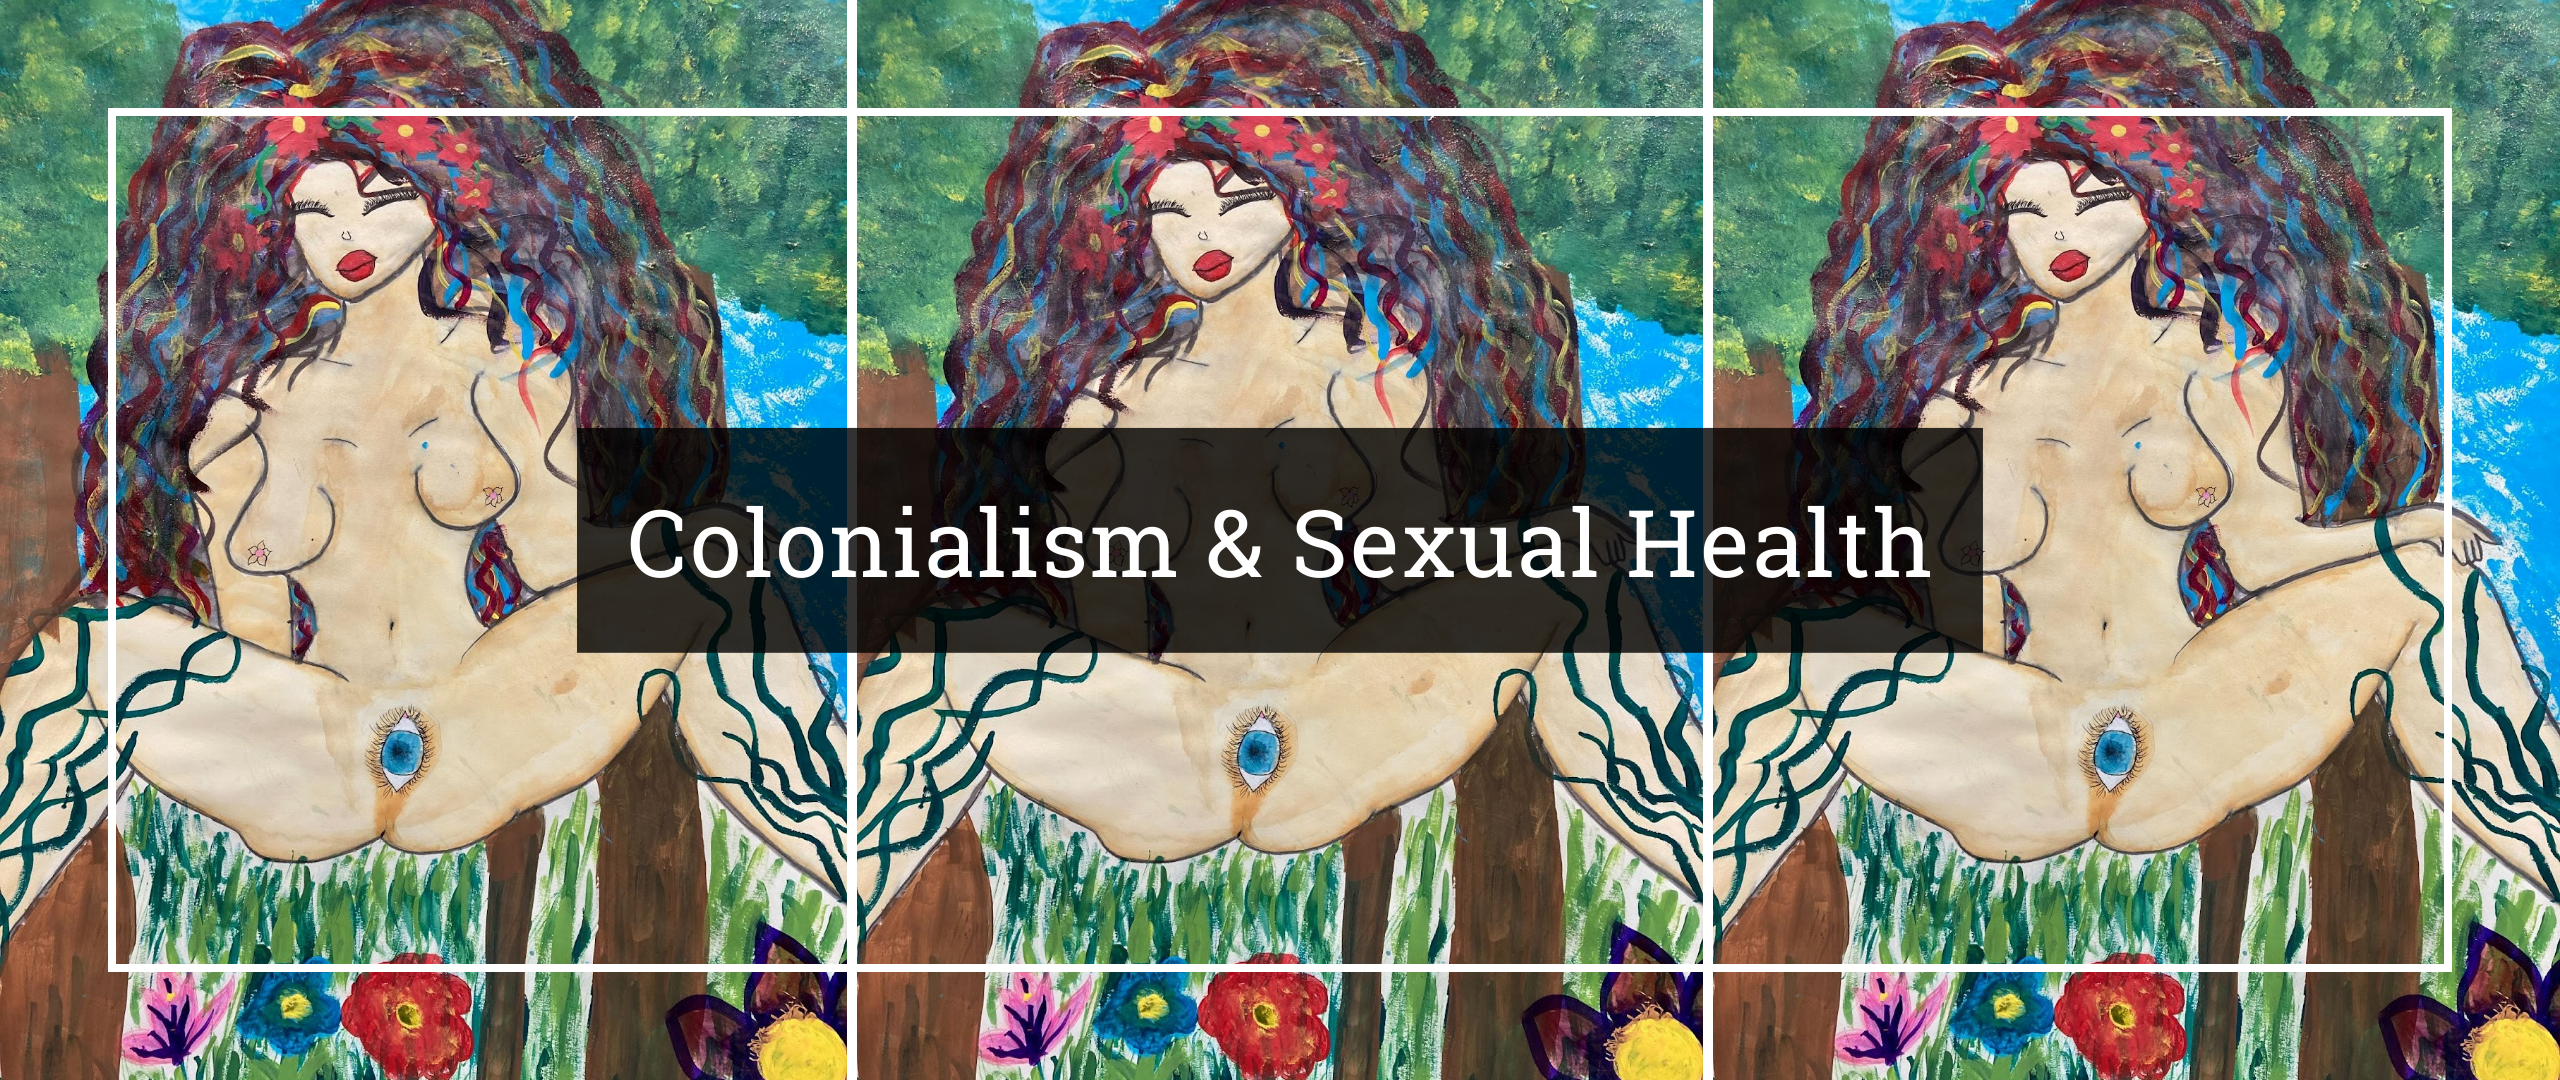 Colonialism and sexual health